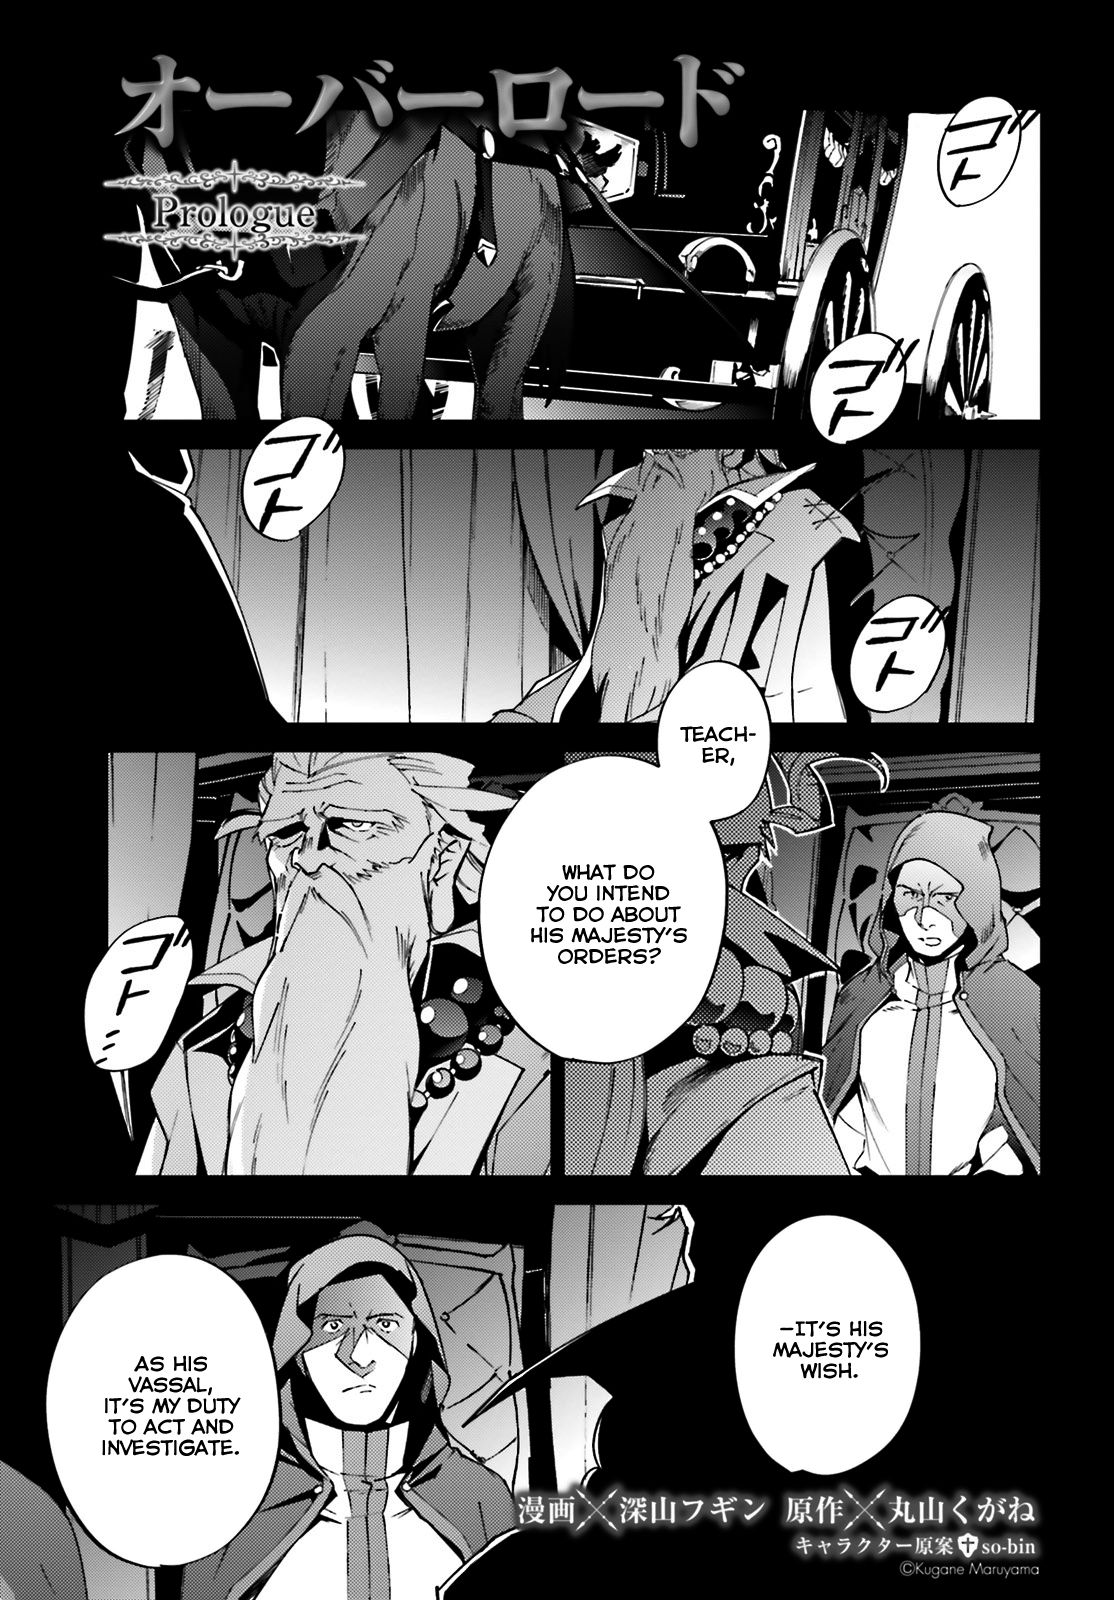 Overlord, Chapter 60.5 - Prologue image 01